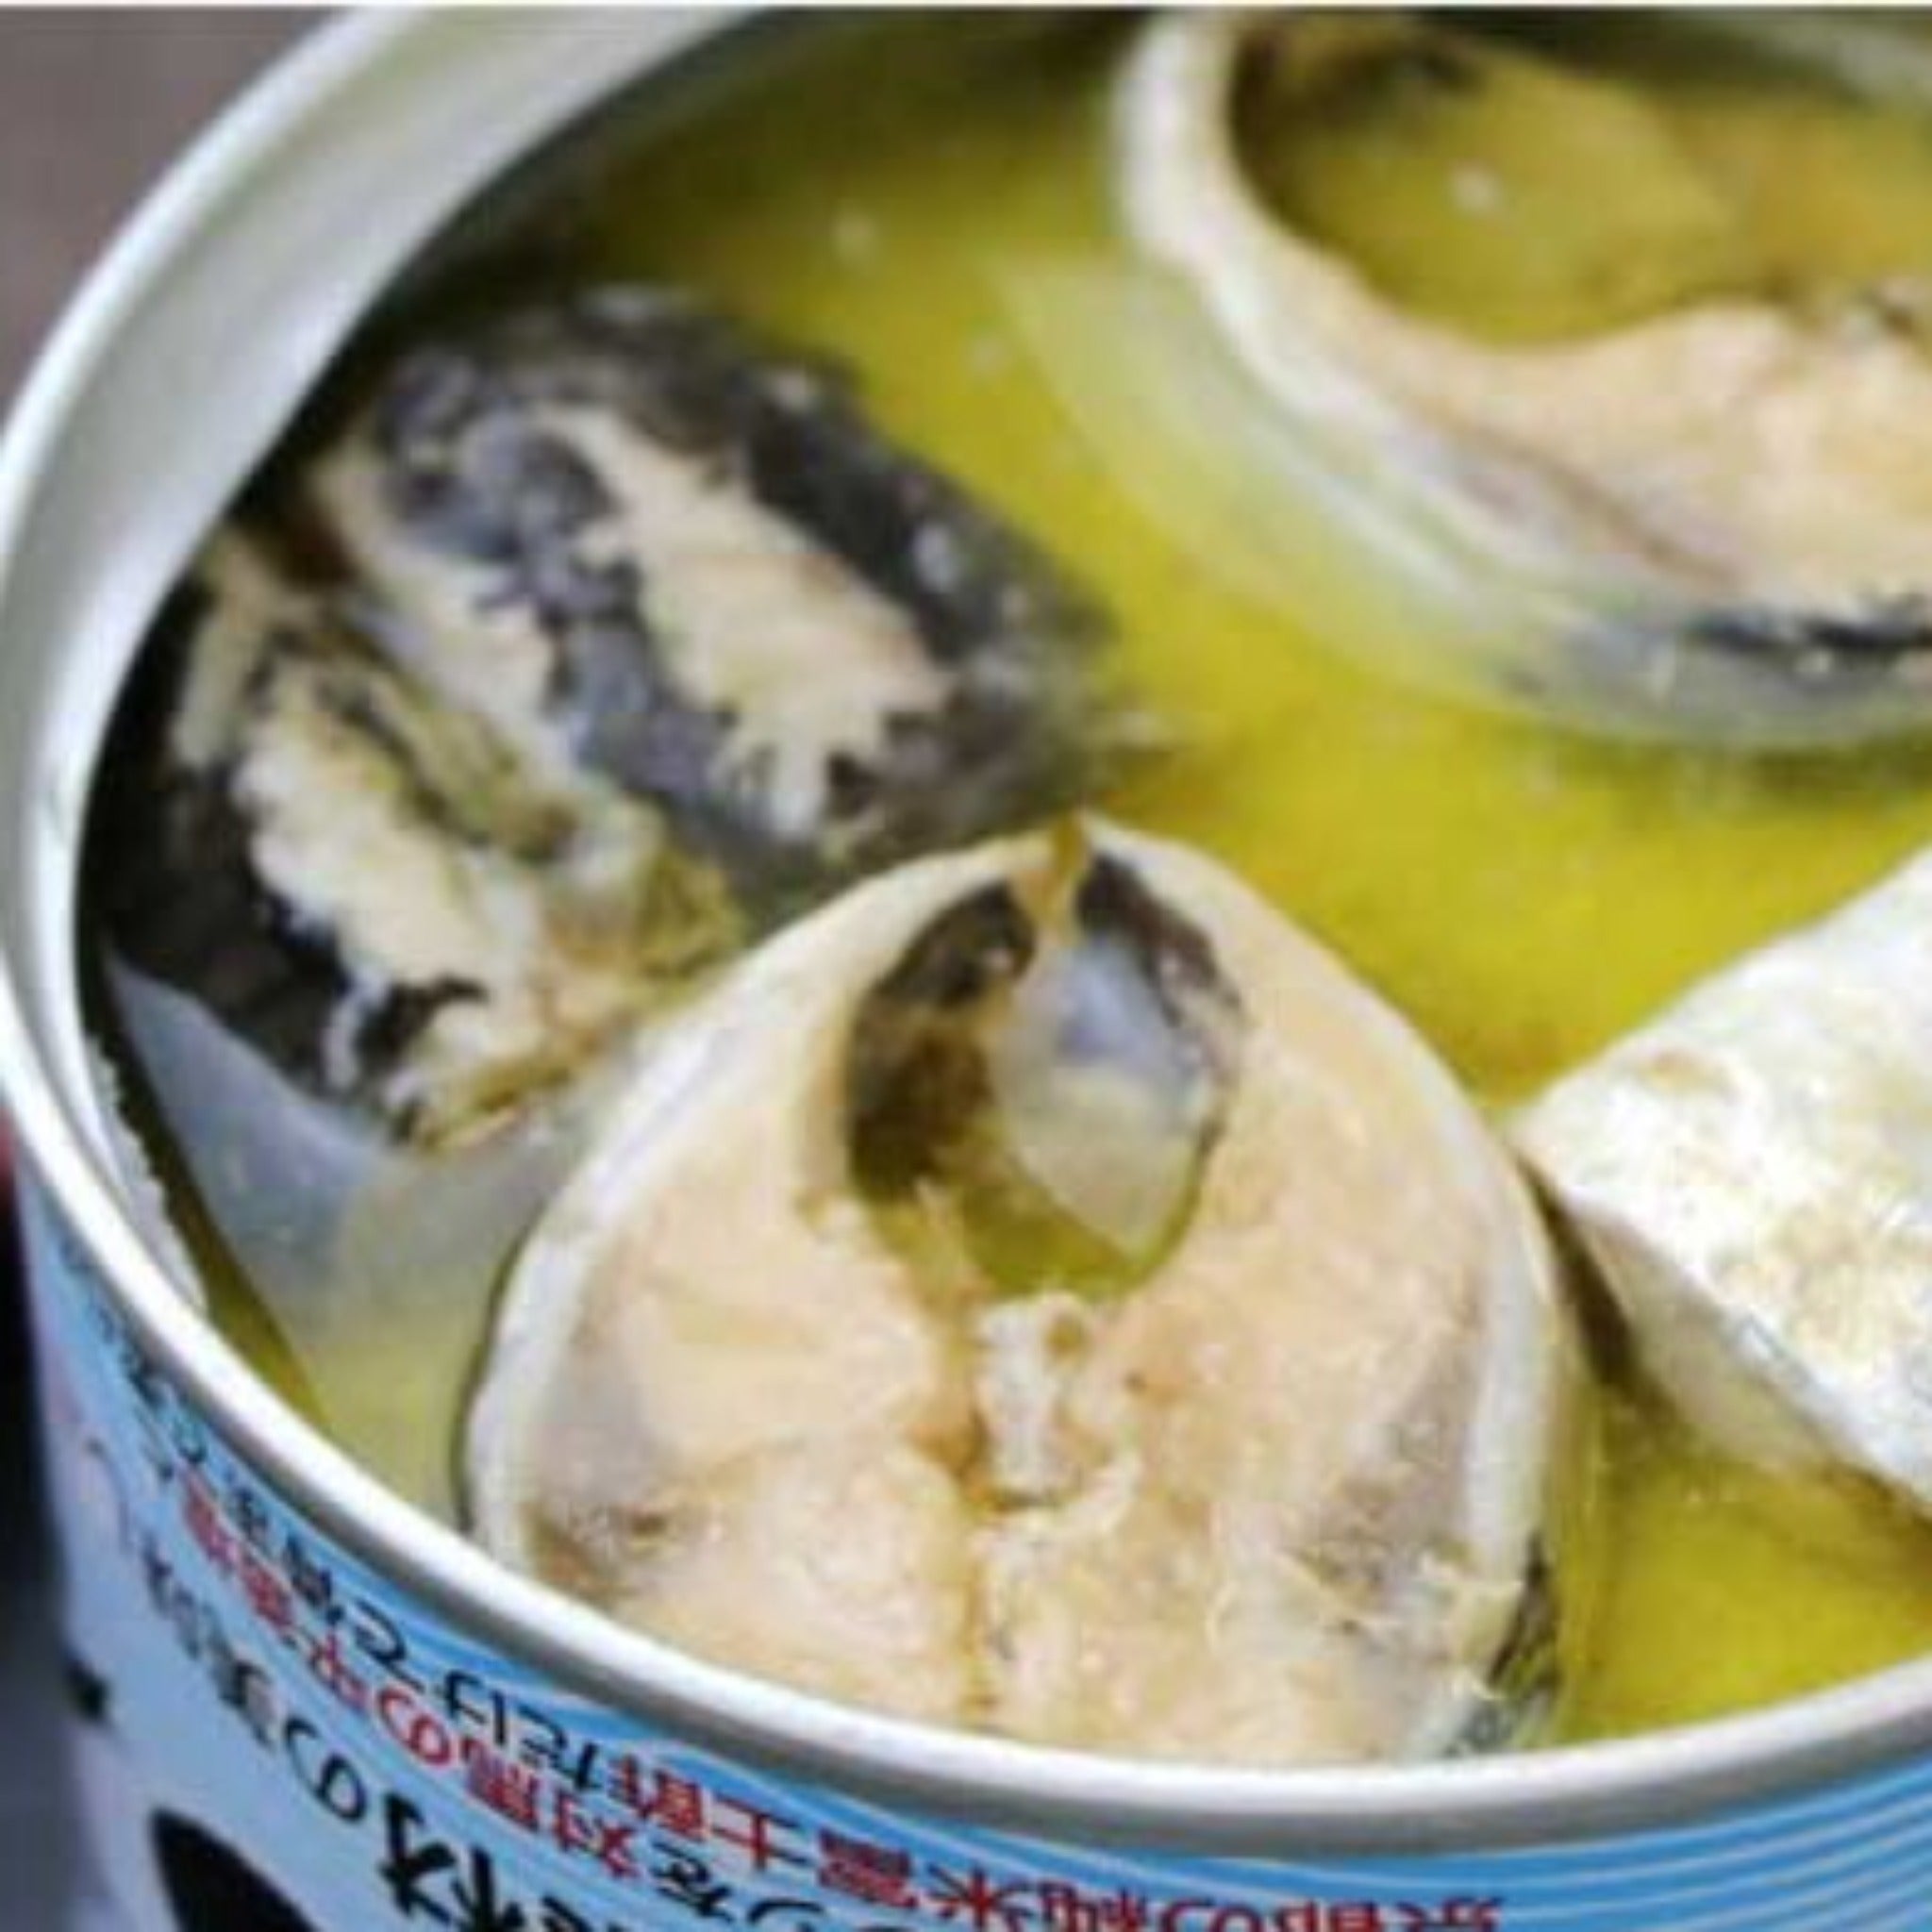 rice　Canned　York　–　Boiled　sardines　New　the　factory